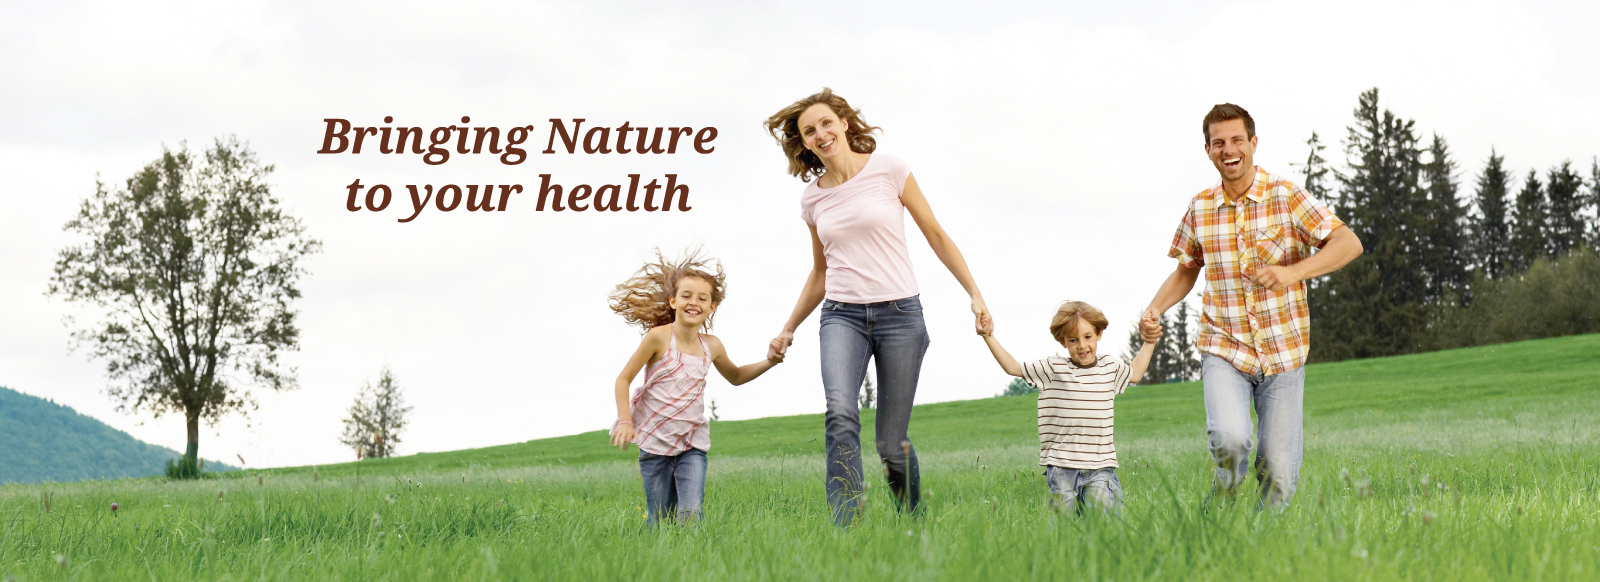 CATALO Bringing Nature to our health